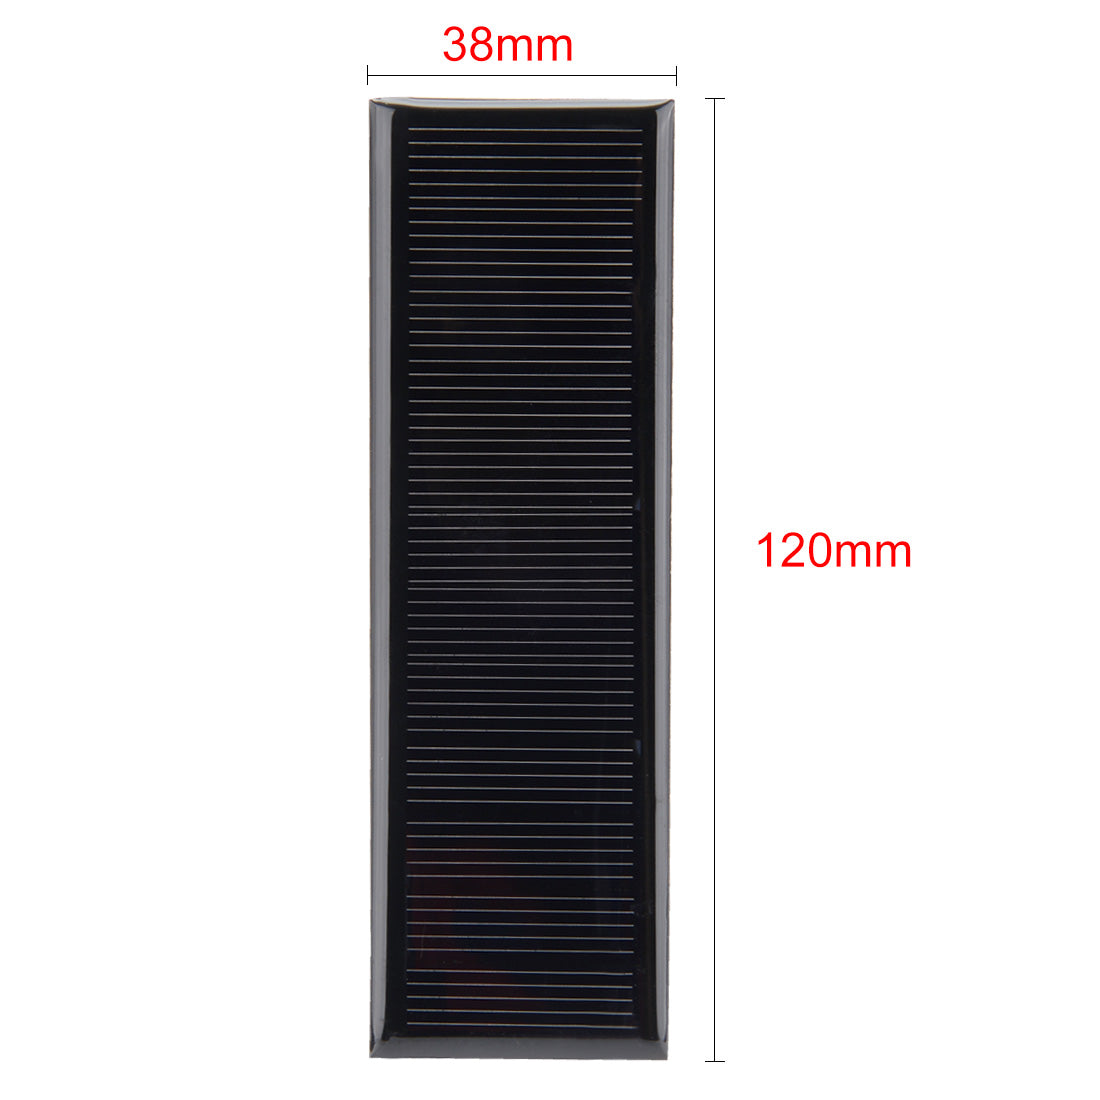 uxcell Uxcell 5Pcs 6V 90mA Poly Mini Solar Cell Panel Module DIY for Phone Light Toys Charger 120mm x 38mm